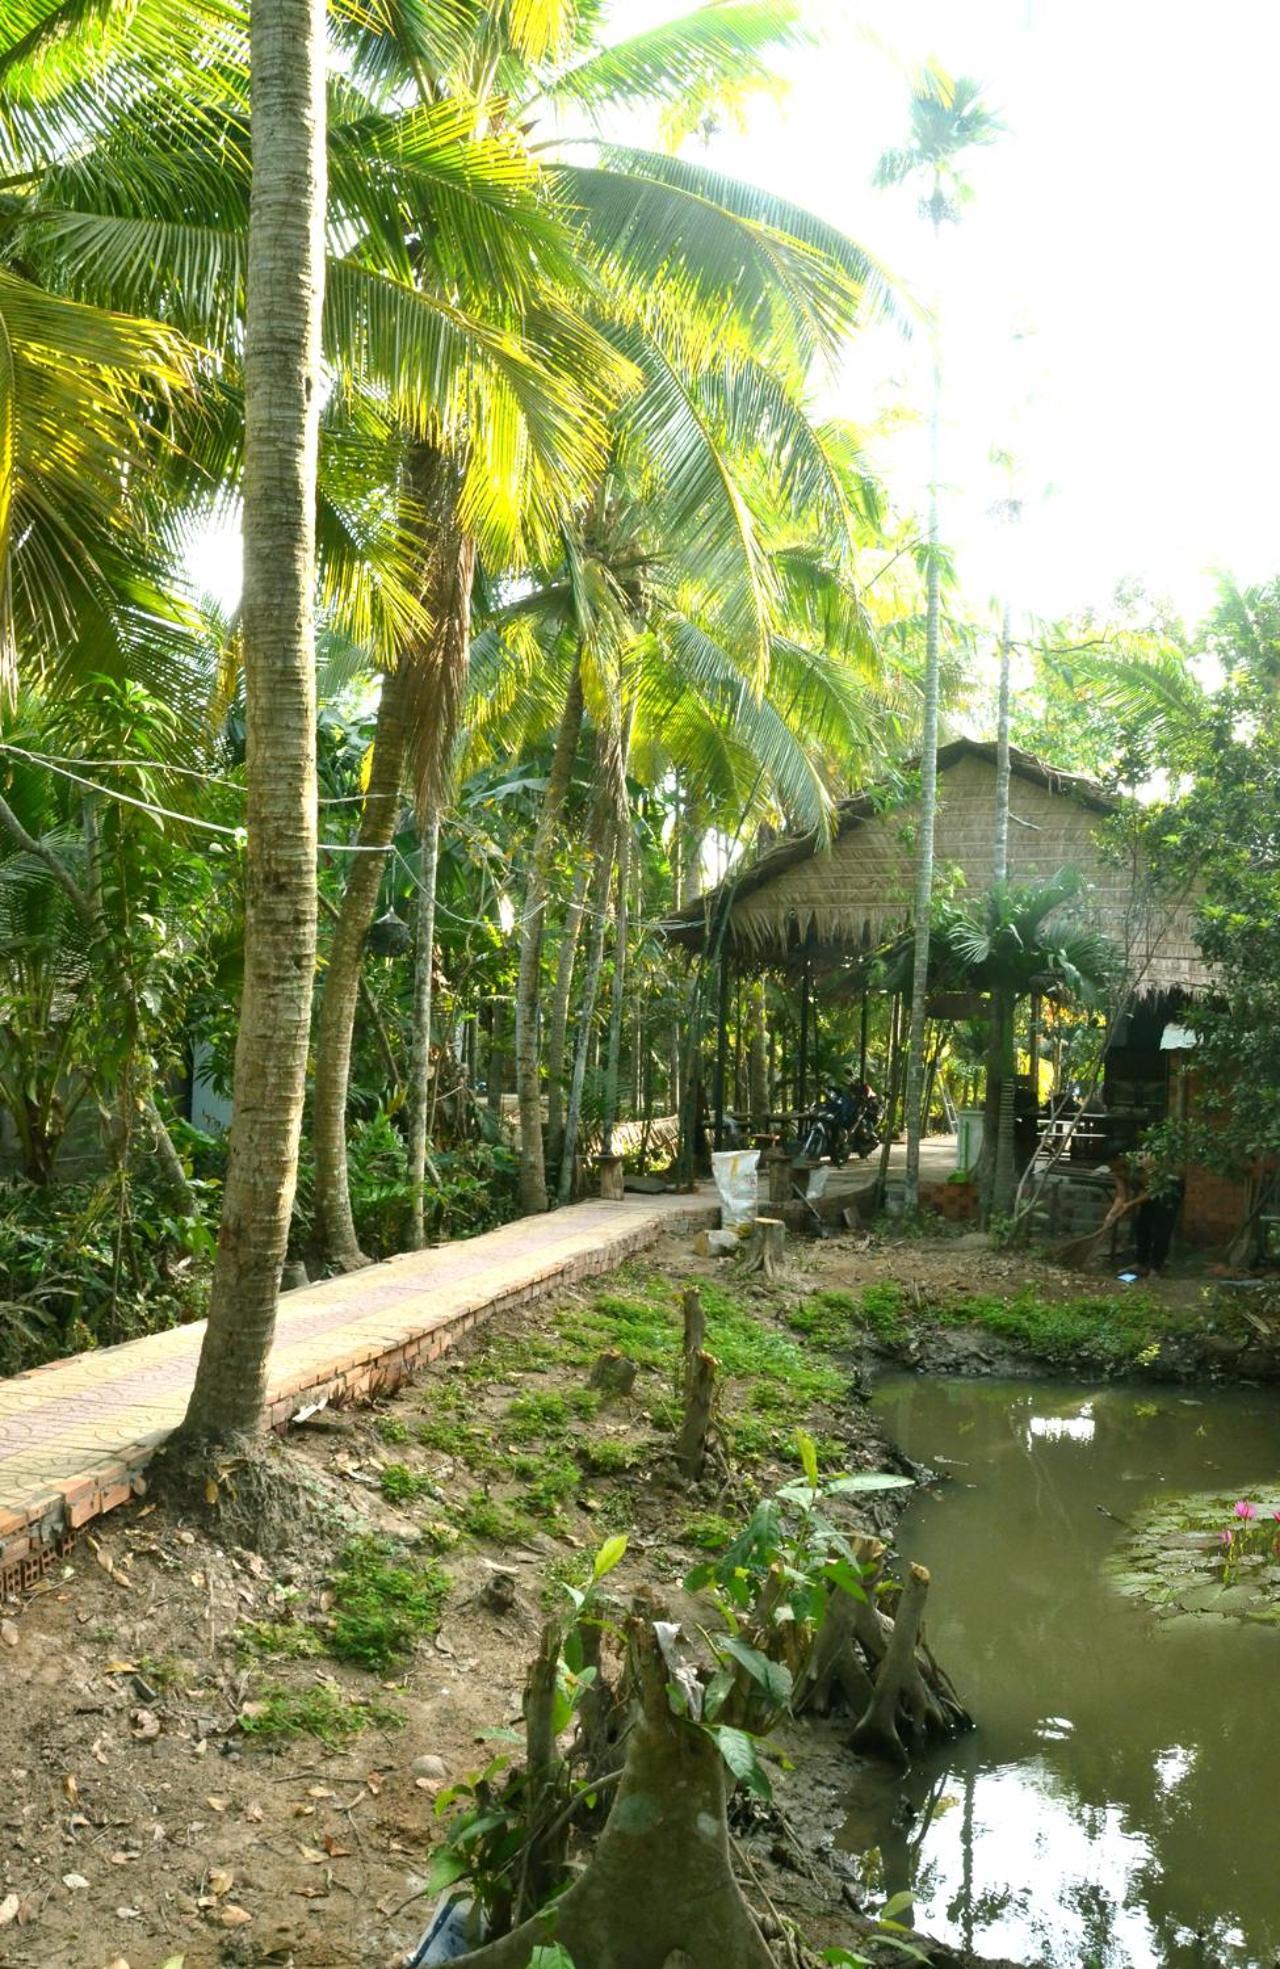 Mekong Farmstay Cantho - C.R Floating Market Cần Thơ Exterior foto